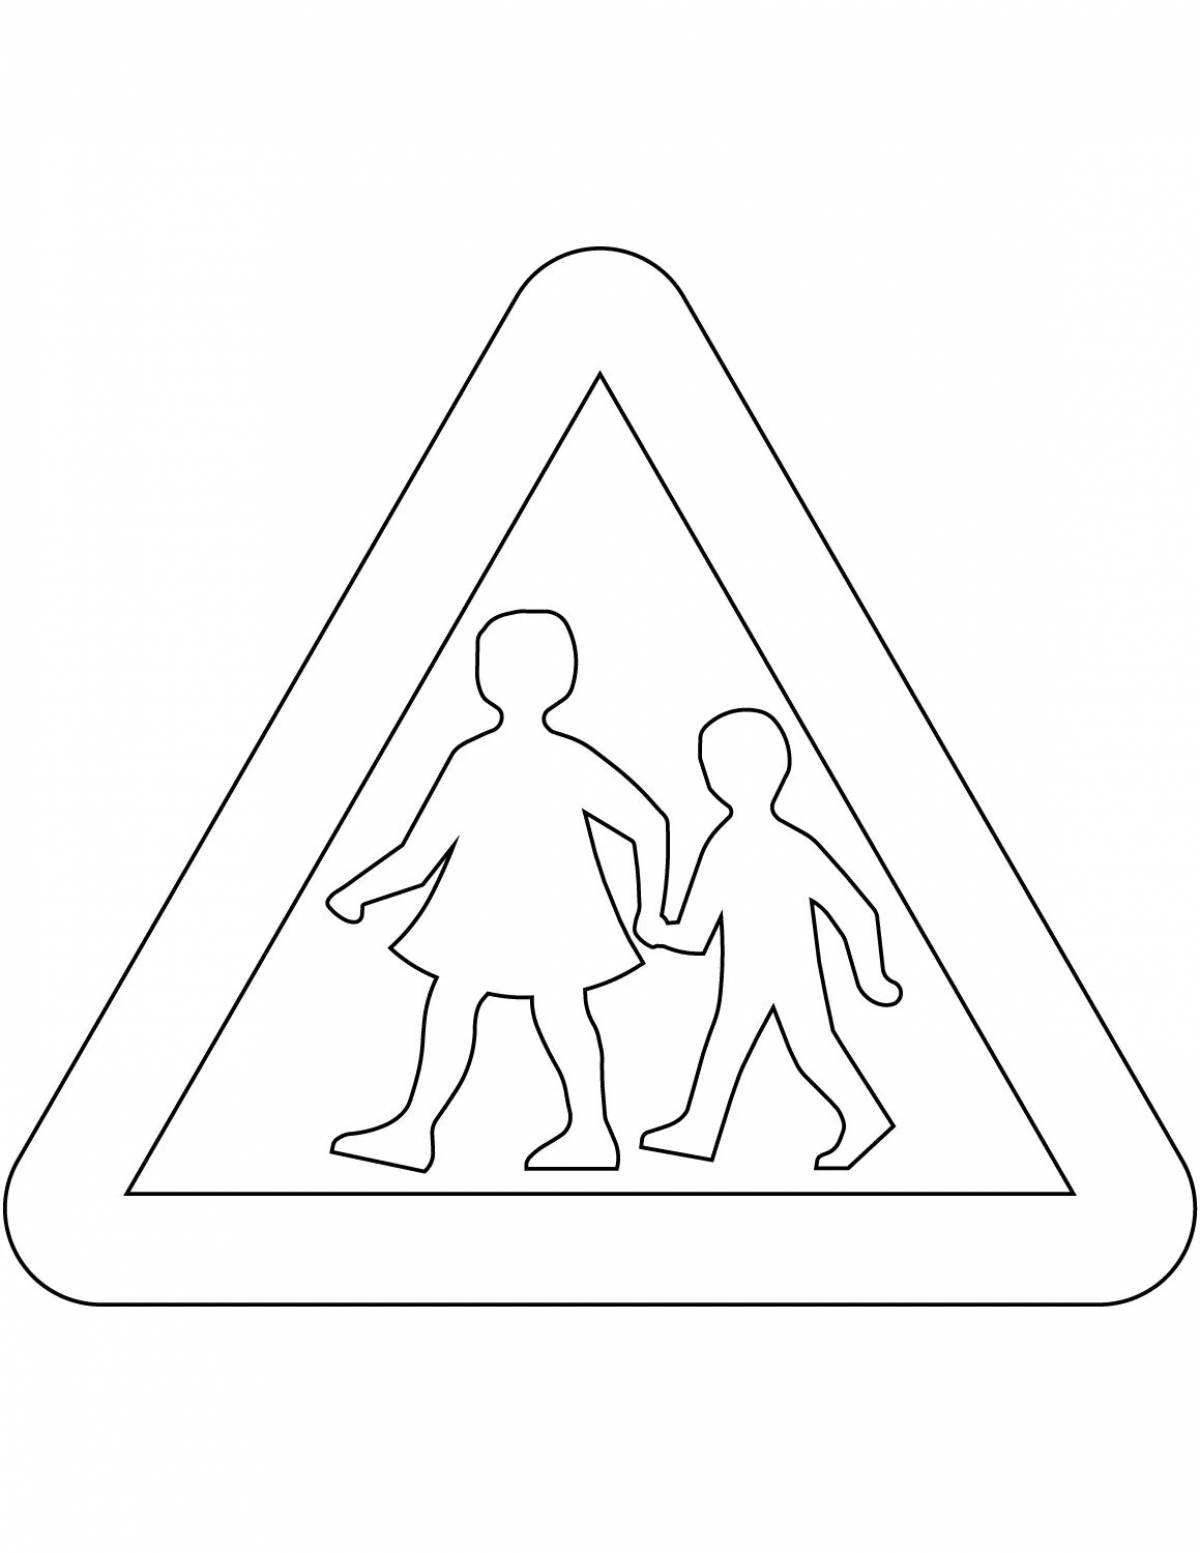 Traffic signs for preschool children according to traffic rules #17